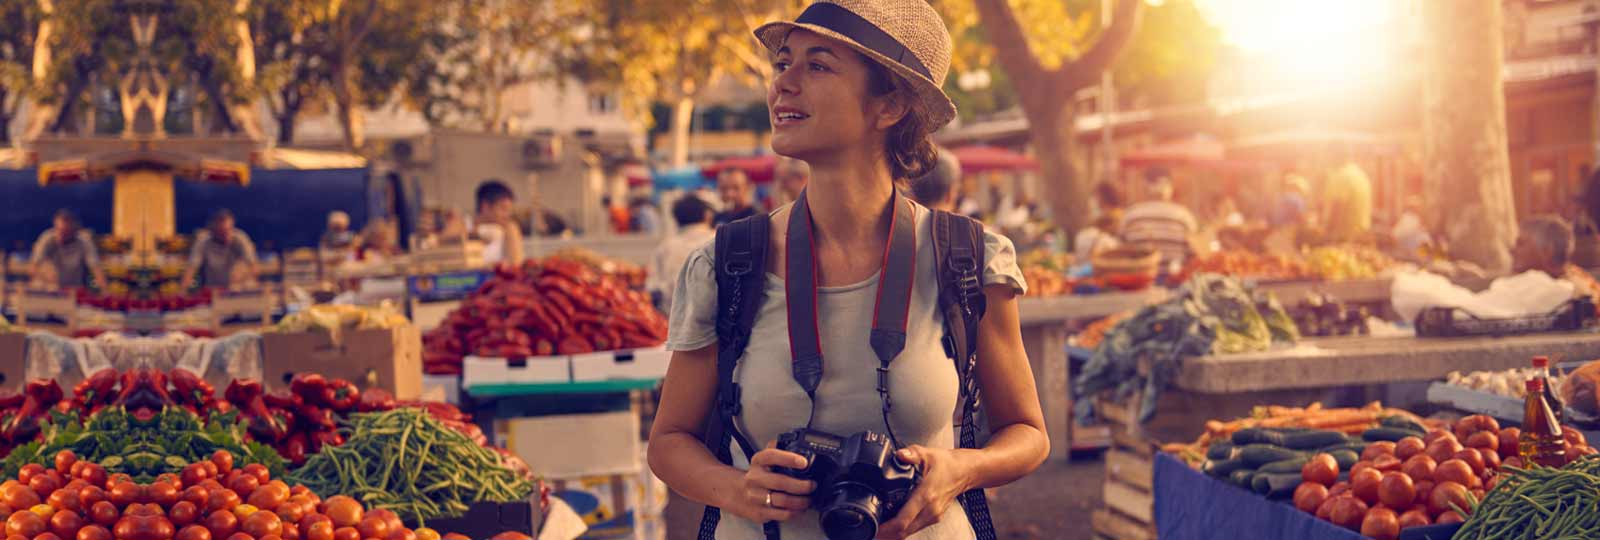 au pair in a market with a camera in the hands